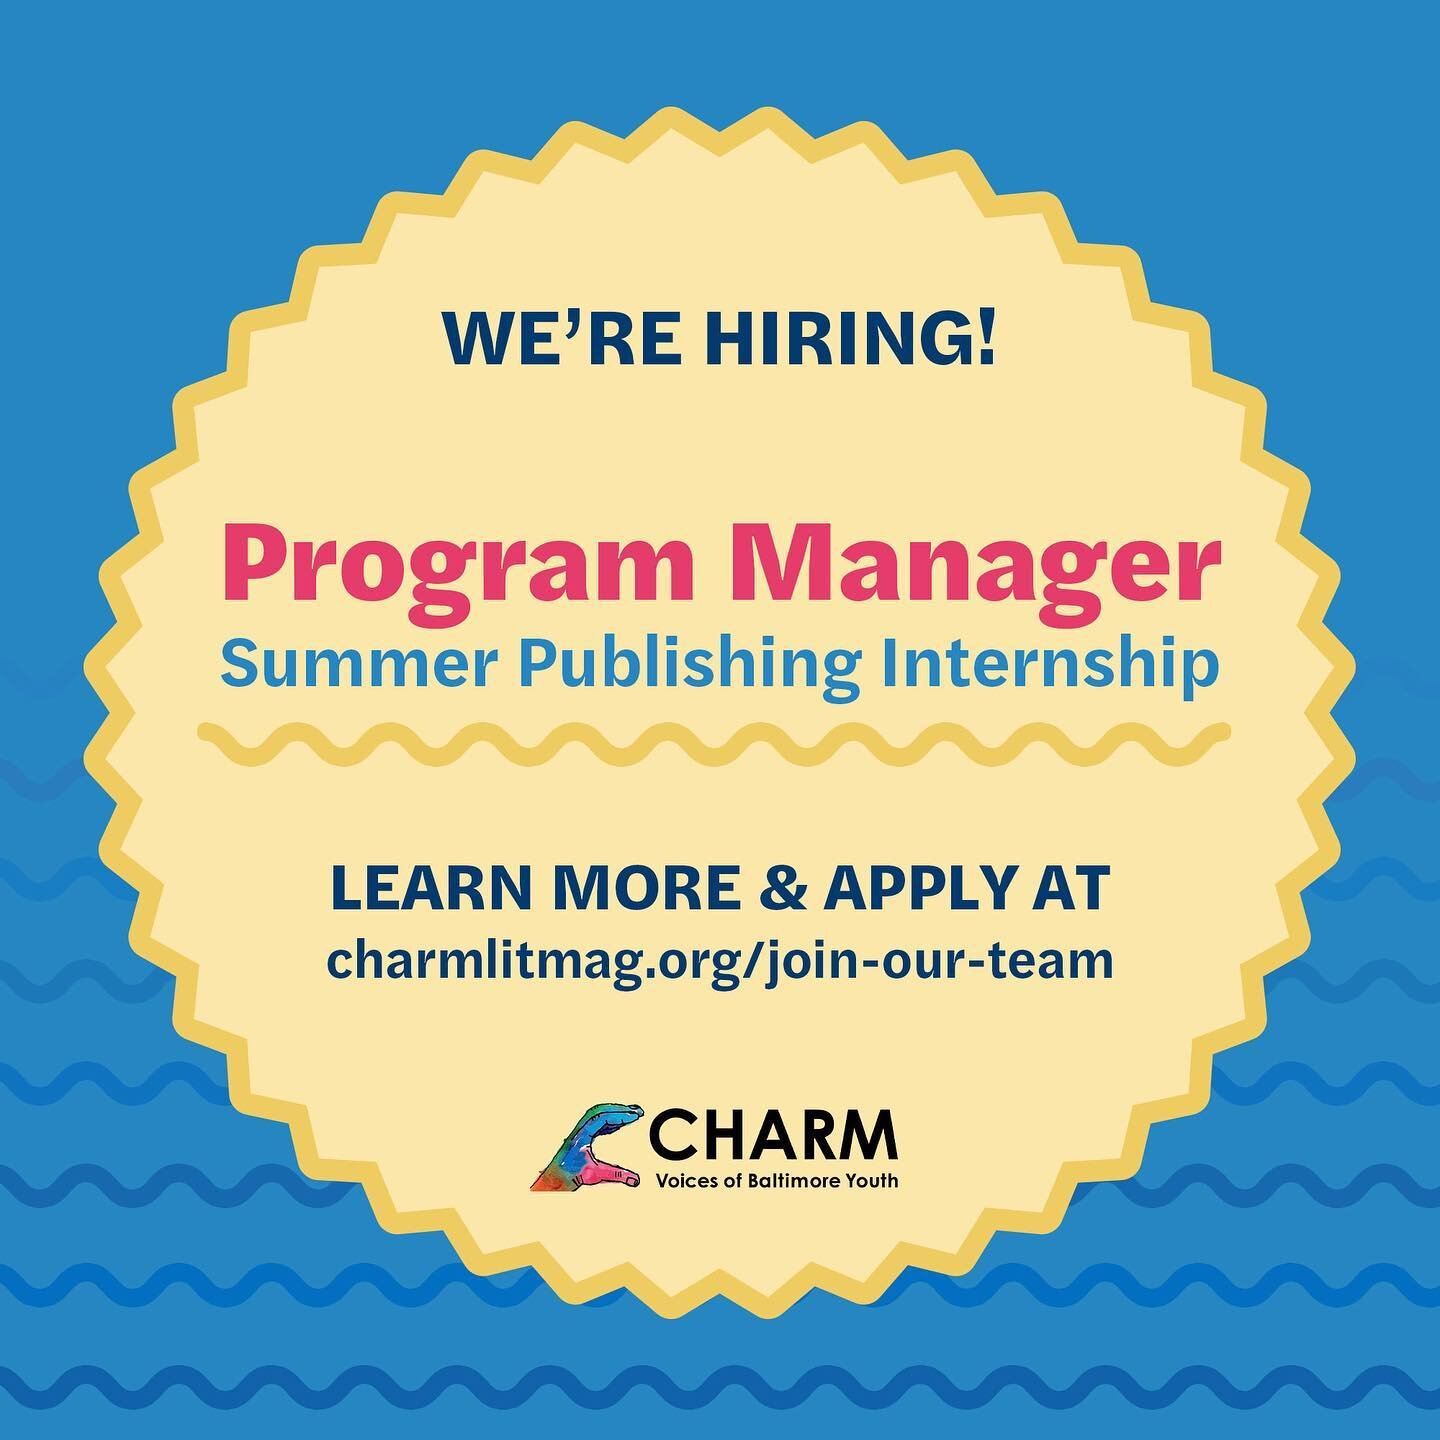 We&rsquo;re hiring for a few positions this summer! Visit www.charmlitmag.org/join-our-team to learn more! 

Job Type: 

Part Time, Summer 2023

Hybrid, 3 days/wk in-person required July/August; flexible/remote hours in May/June 

Reports to: Executi